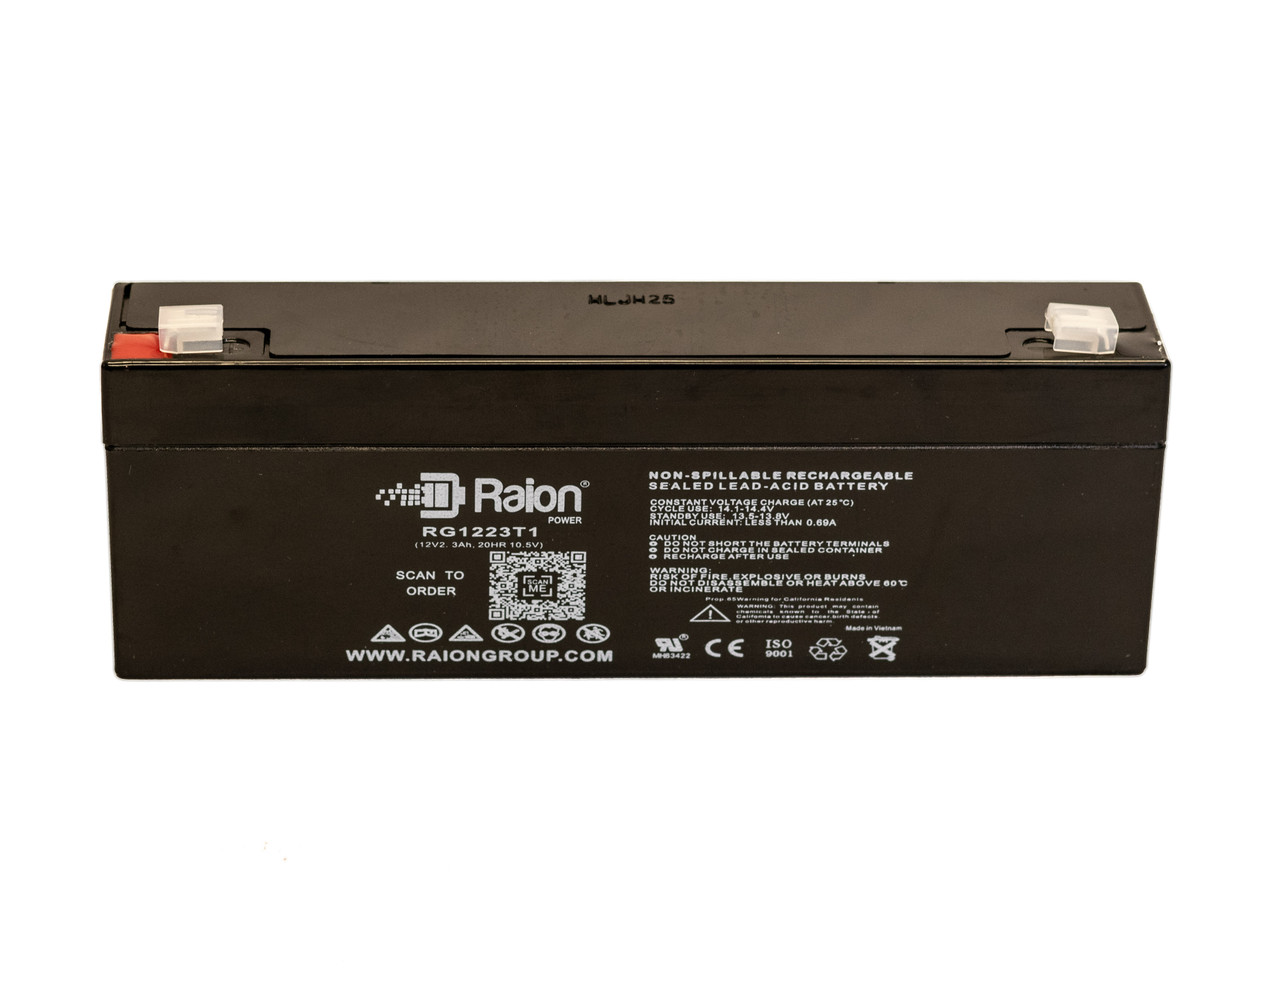 Raion Power 12V 2.3Ah SLA Battery With T1 Terminals For Brentwood Instruments 320 Defibrillator